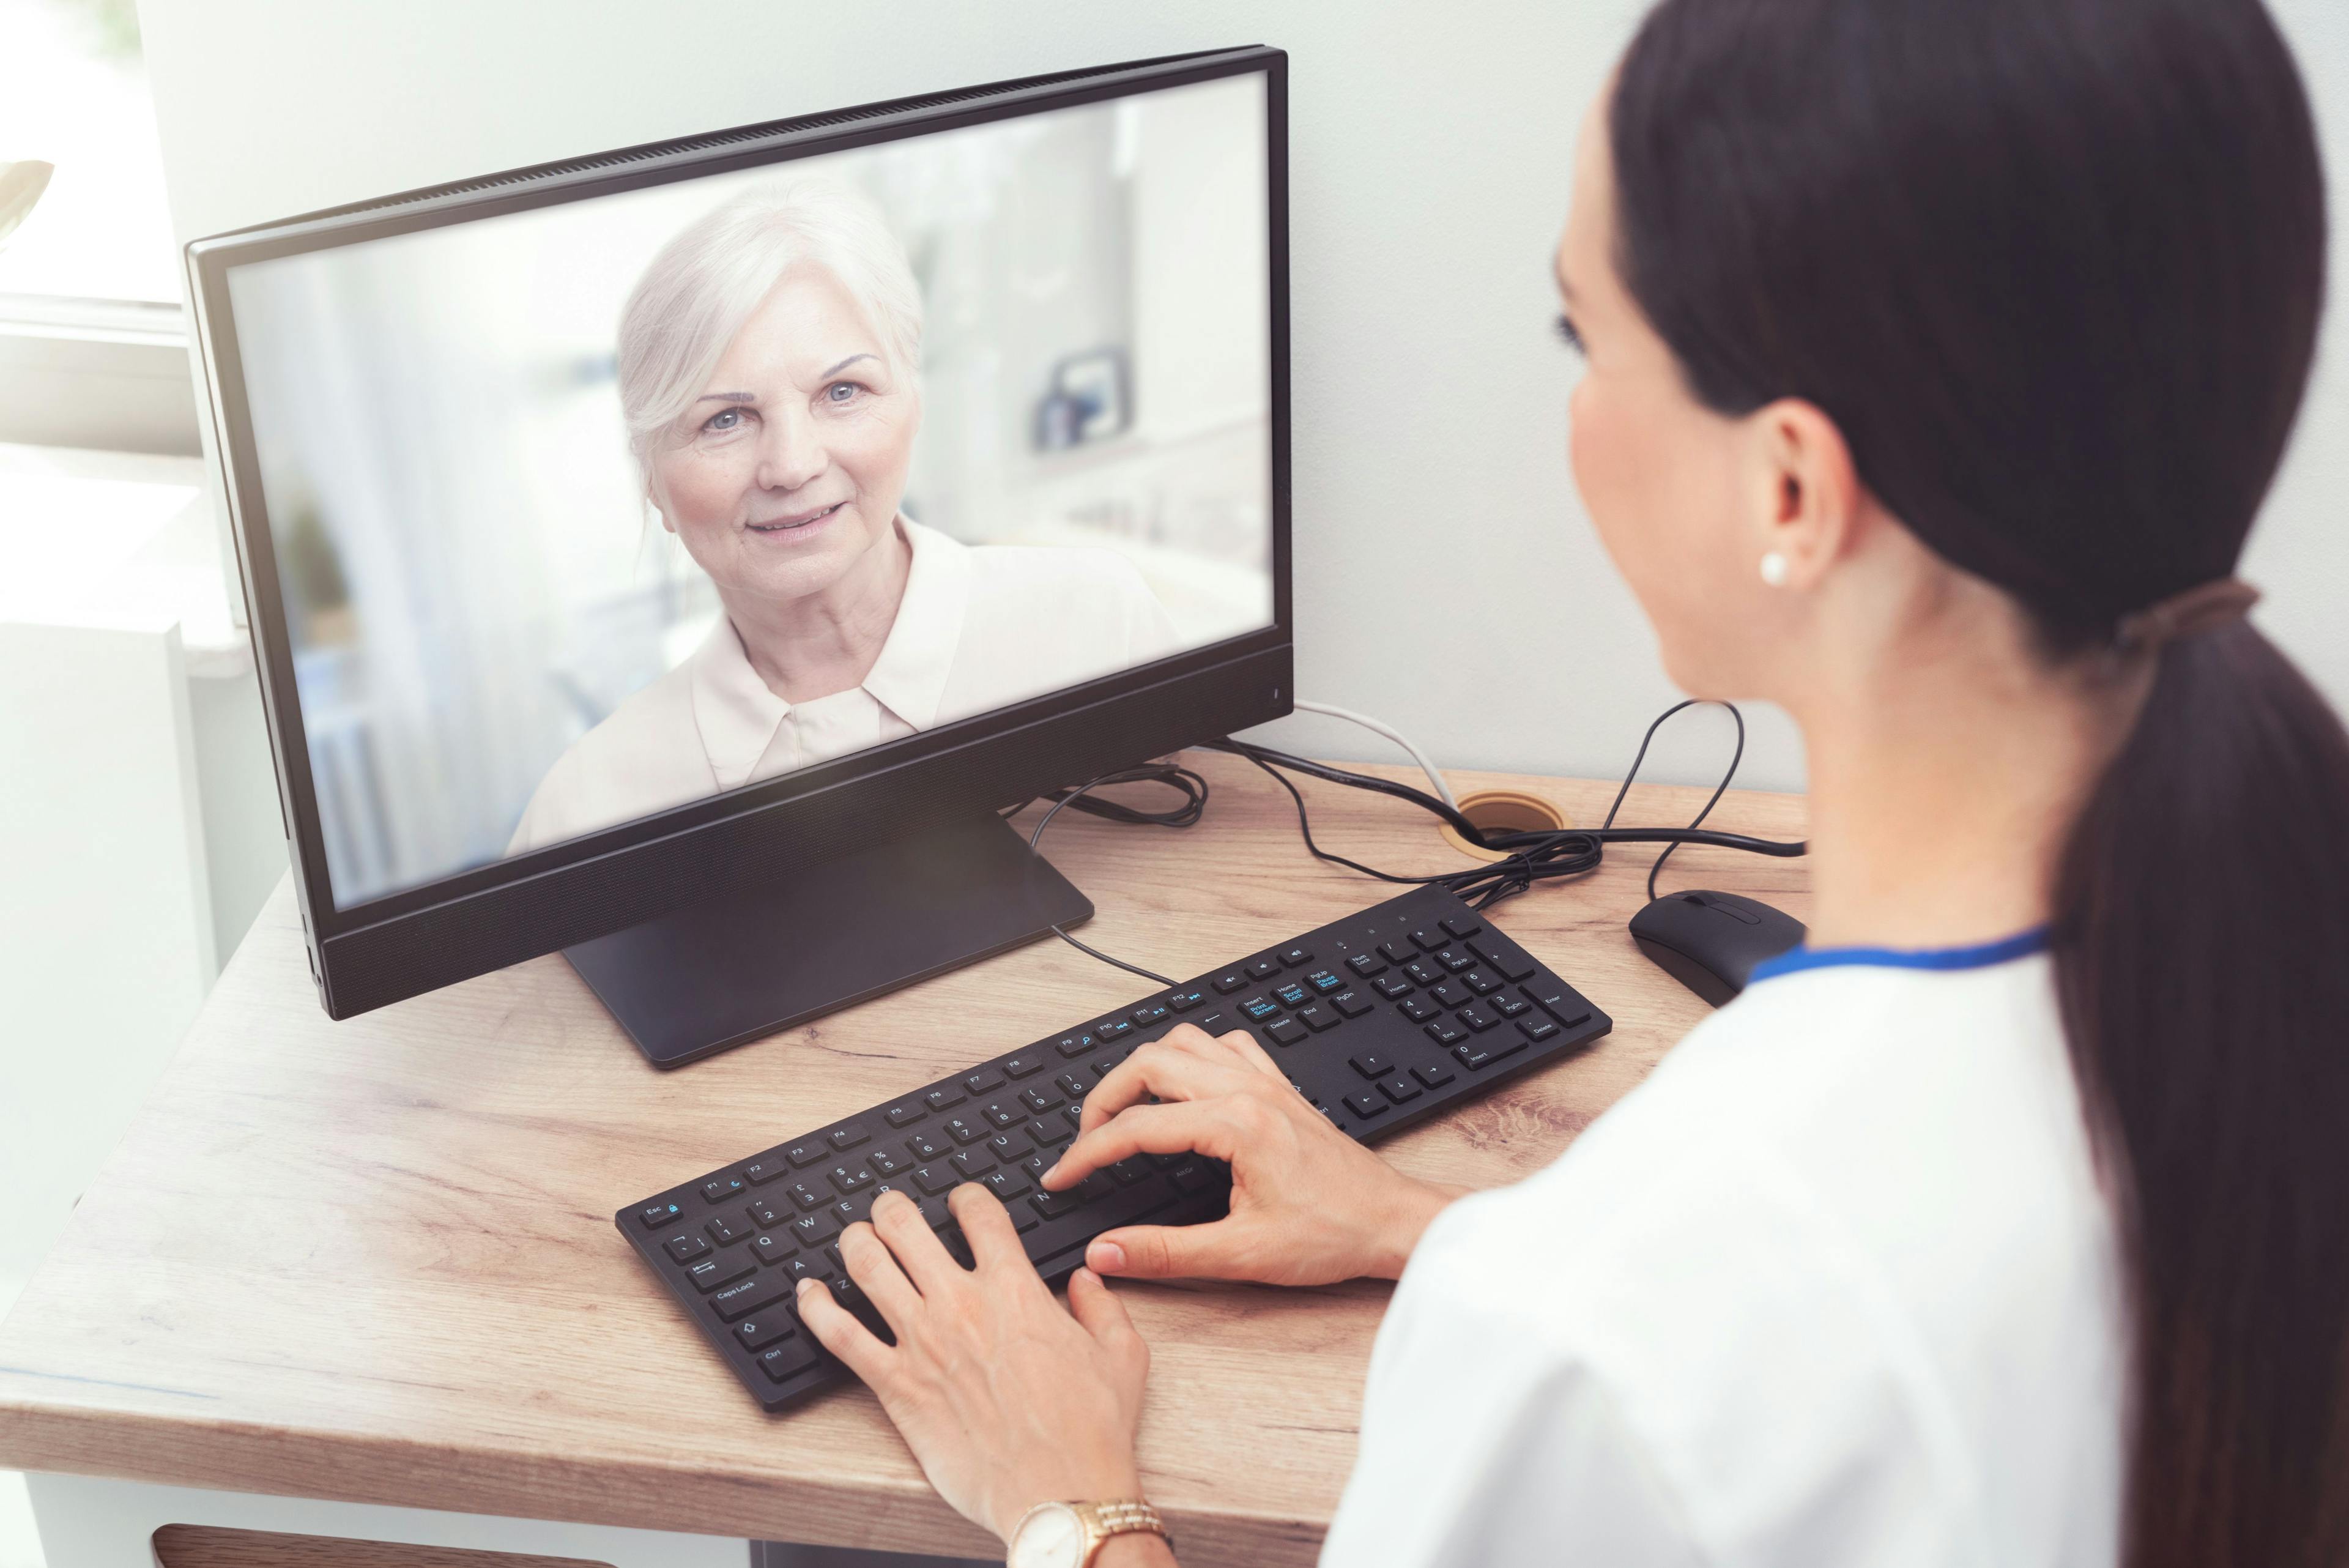 Support for protecting telemedicine access remains broad